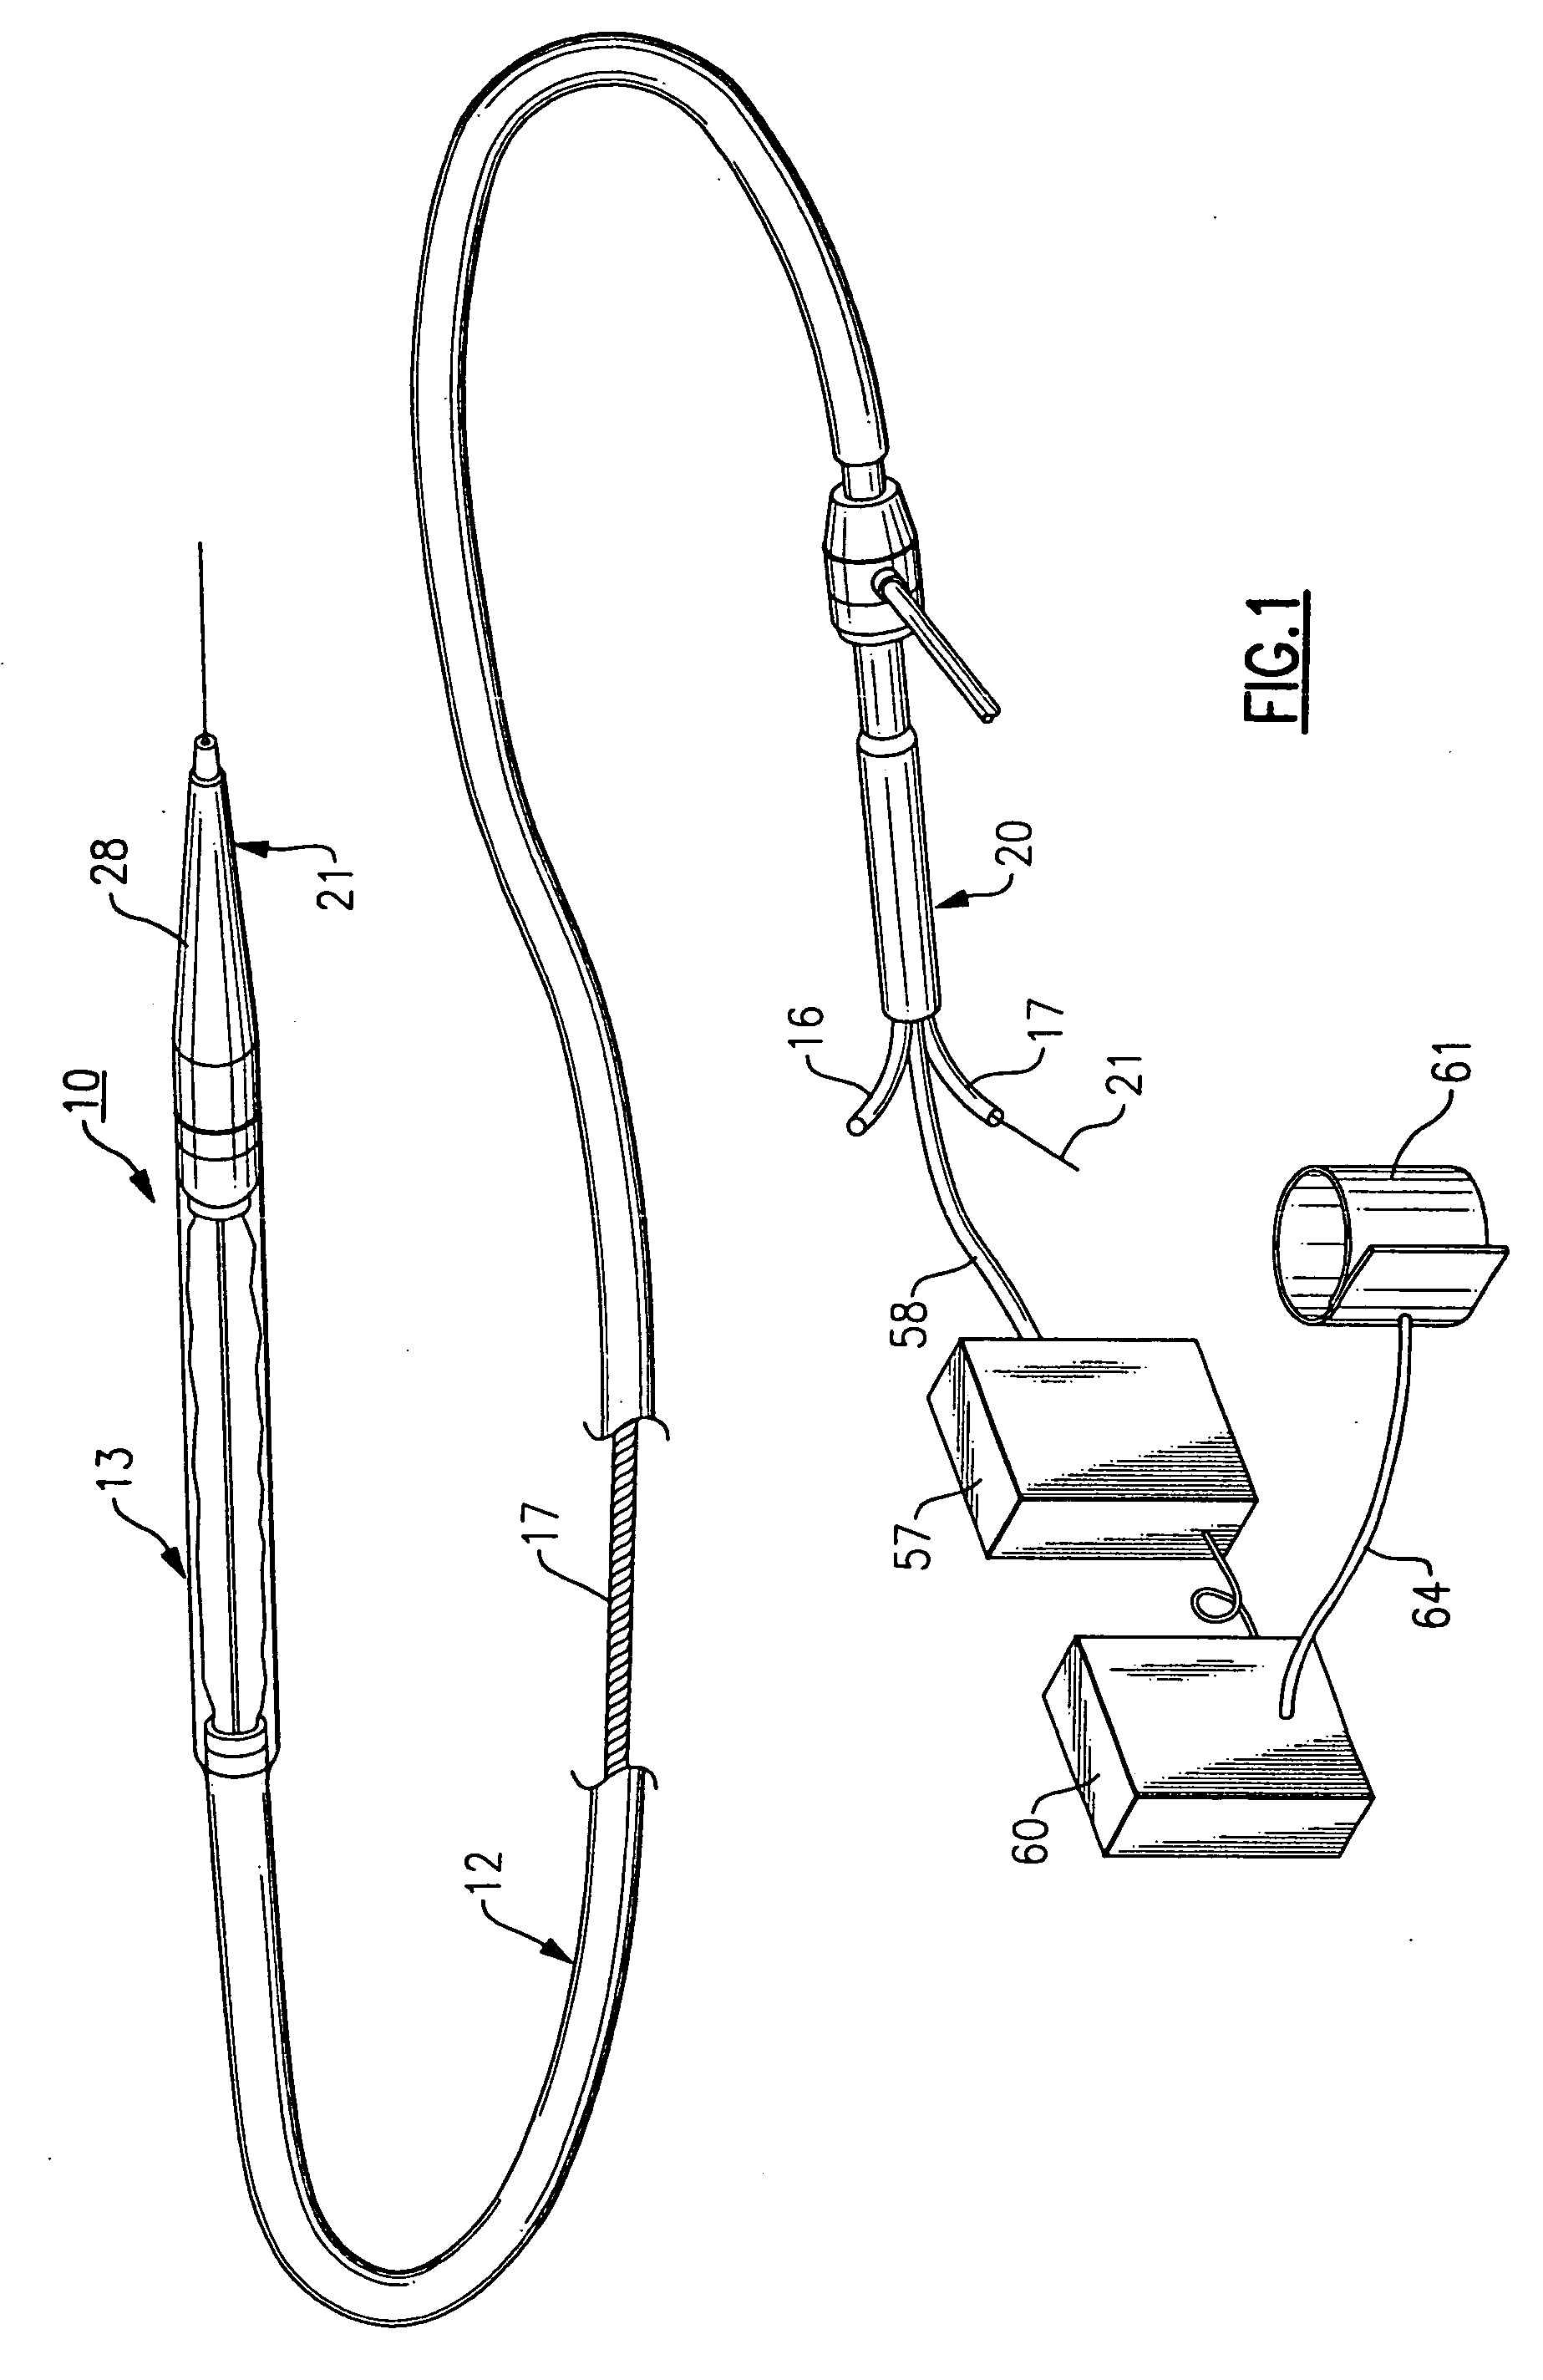 Apparatus for aiding the flow of blood through patient's circulatory system